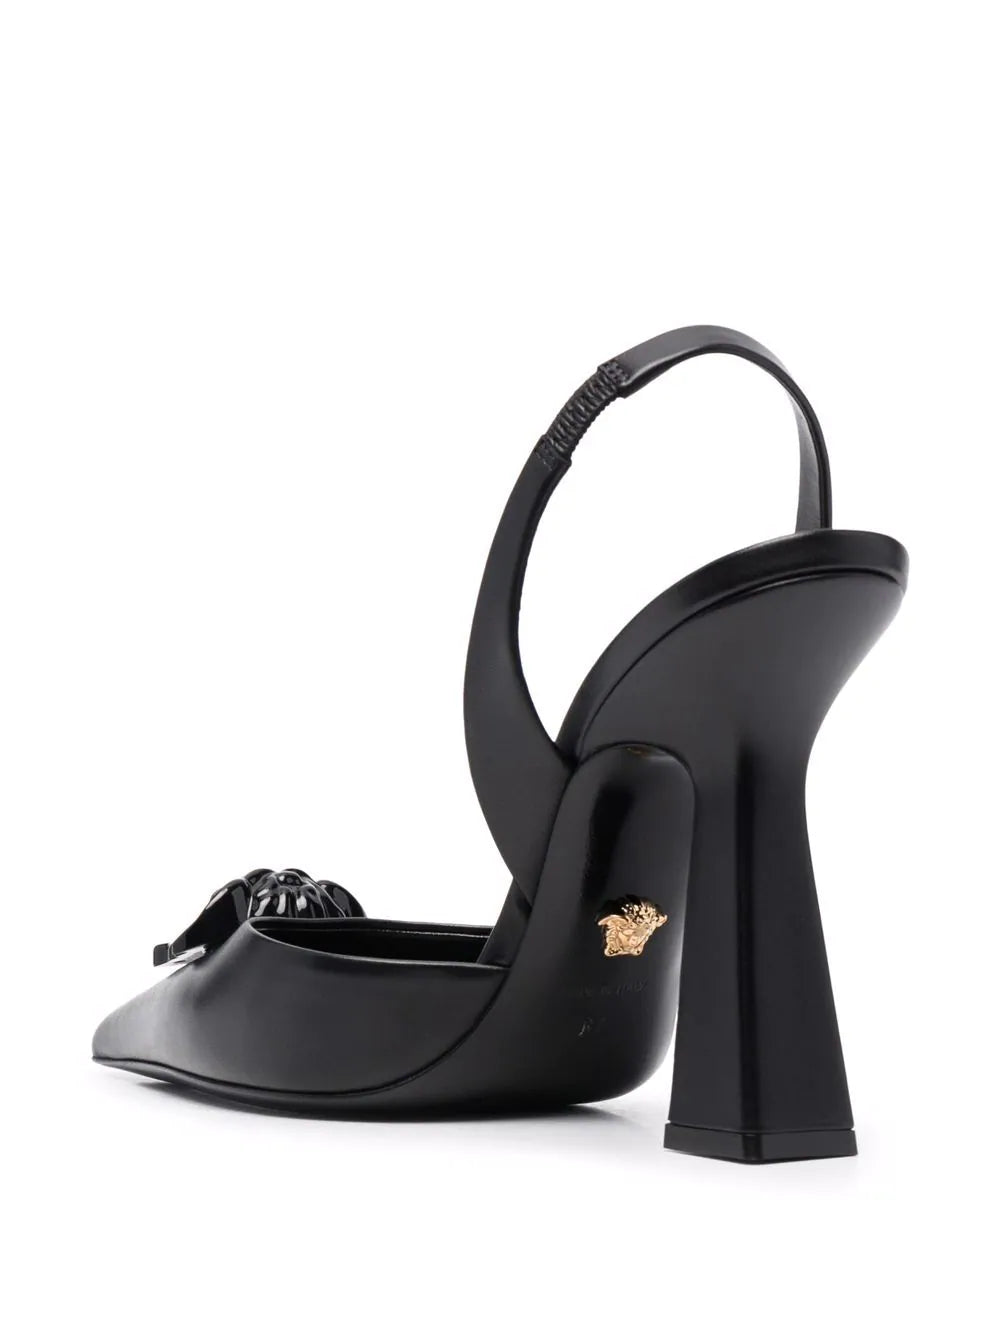 Patent leather sandal Versace Black size 37 EU in Patent leather